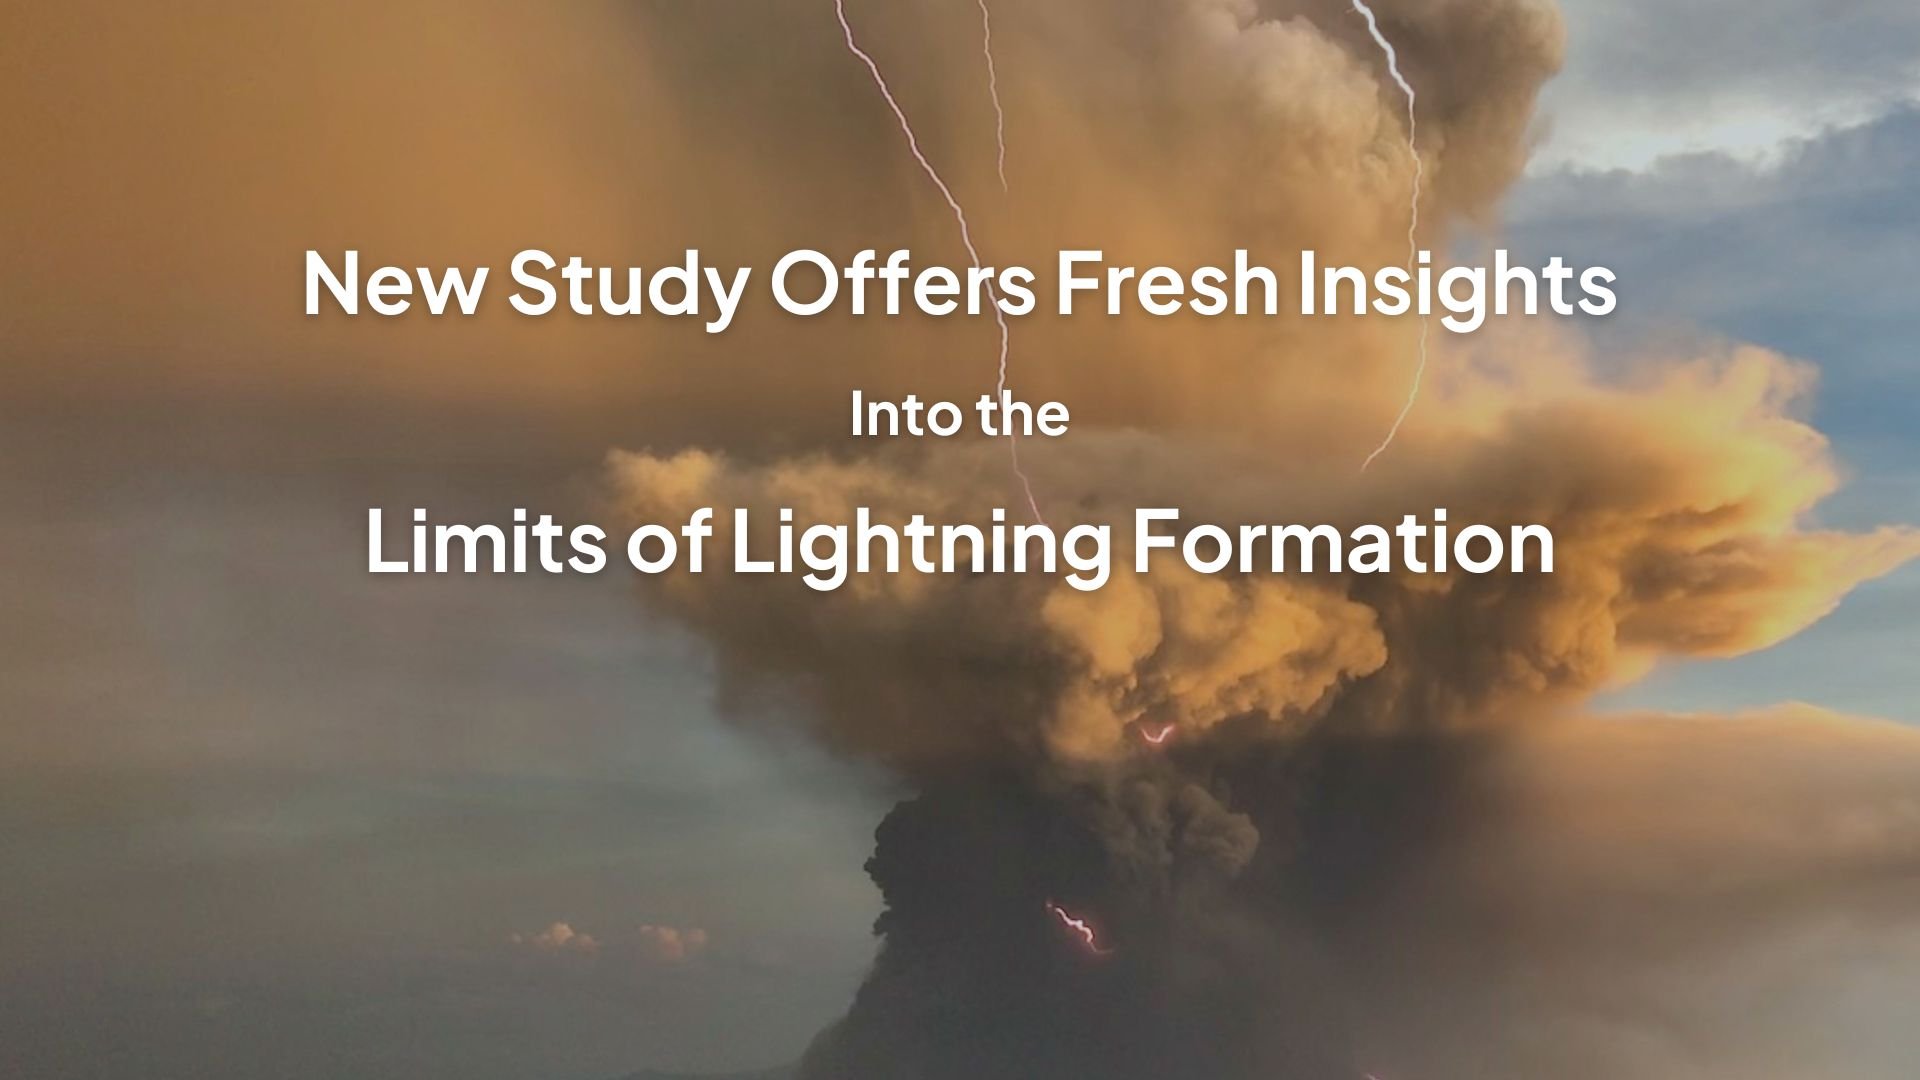 New Study Offers Fresh Insights Into the Limits of Lightning Formation